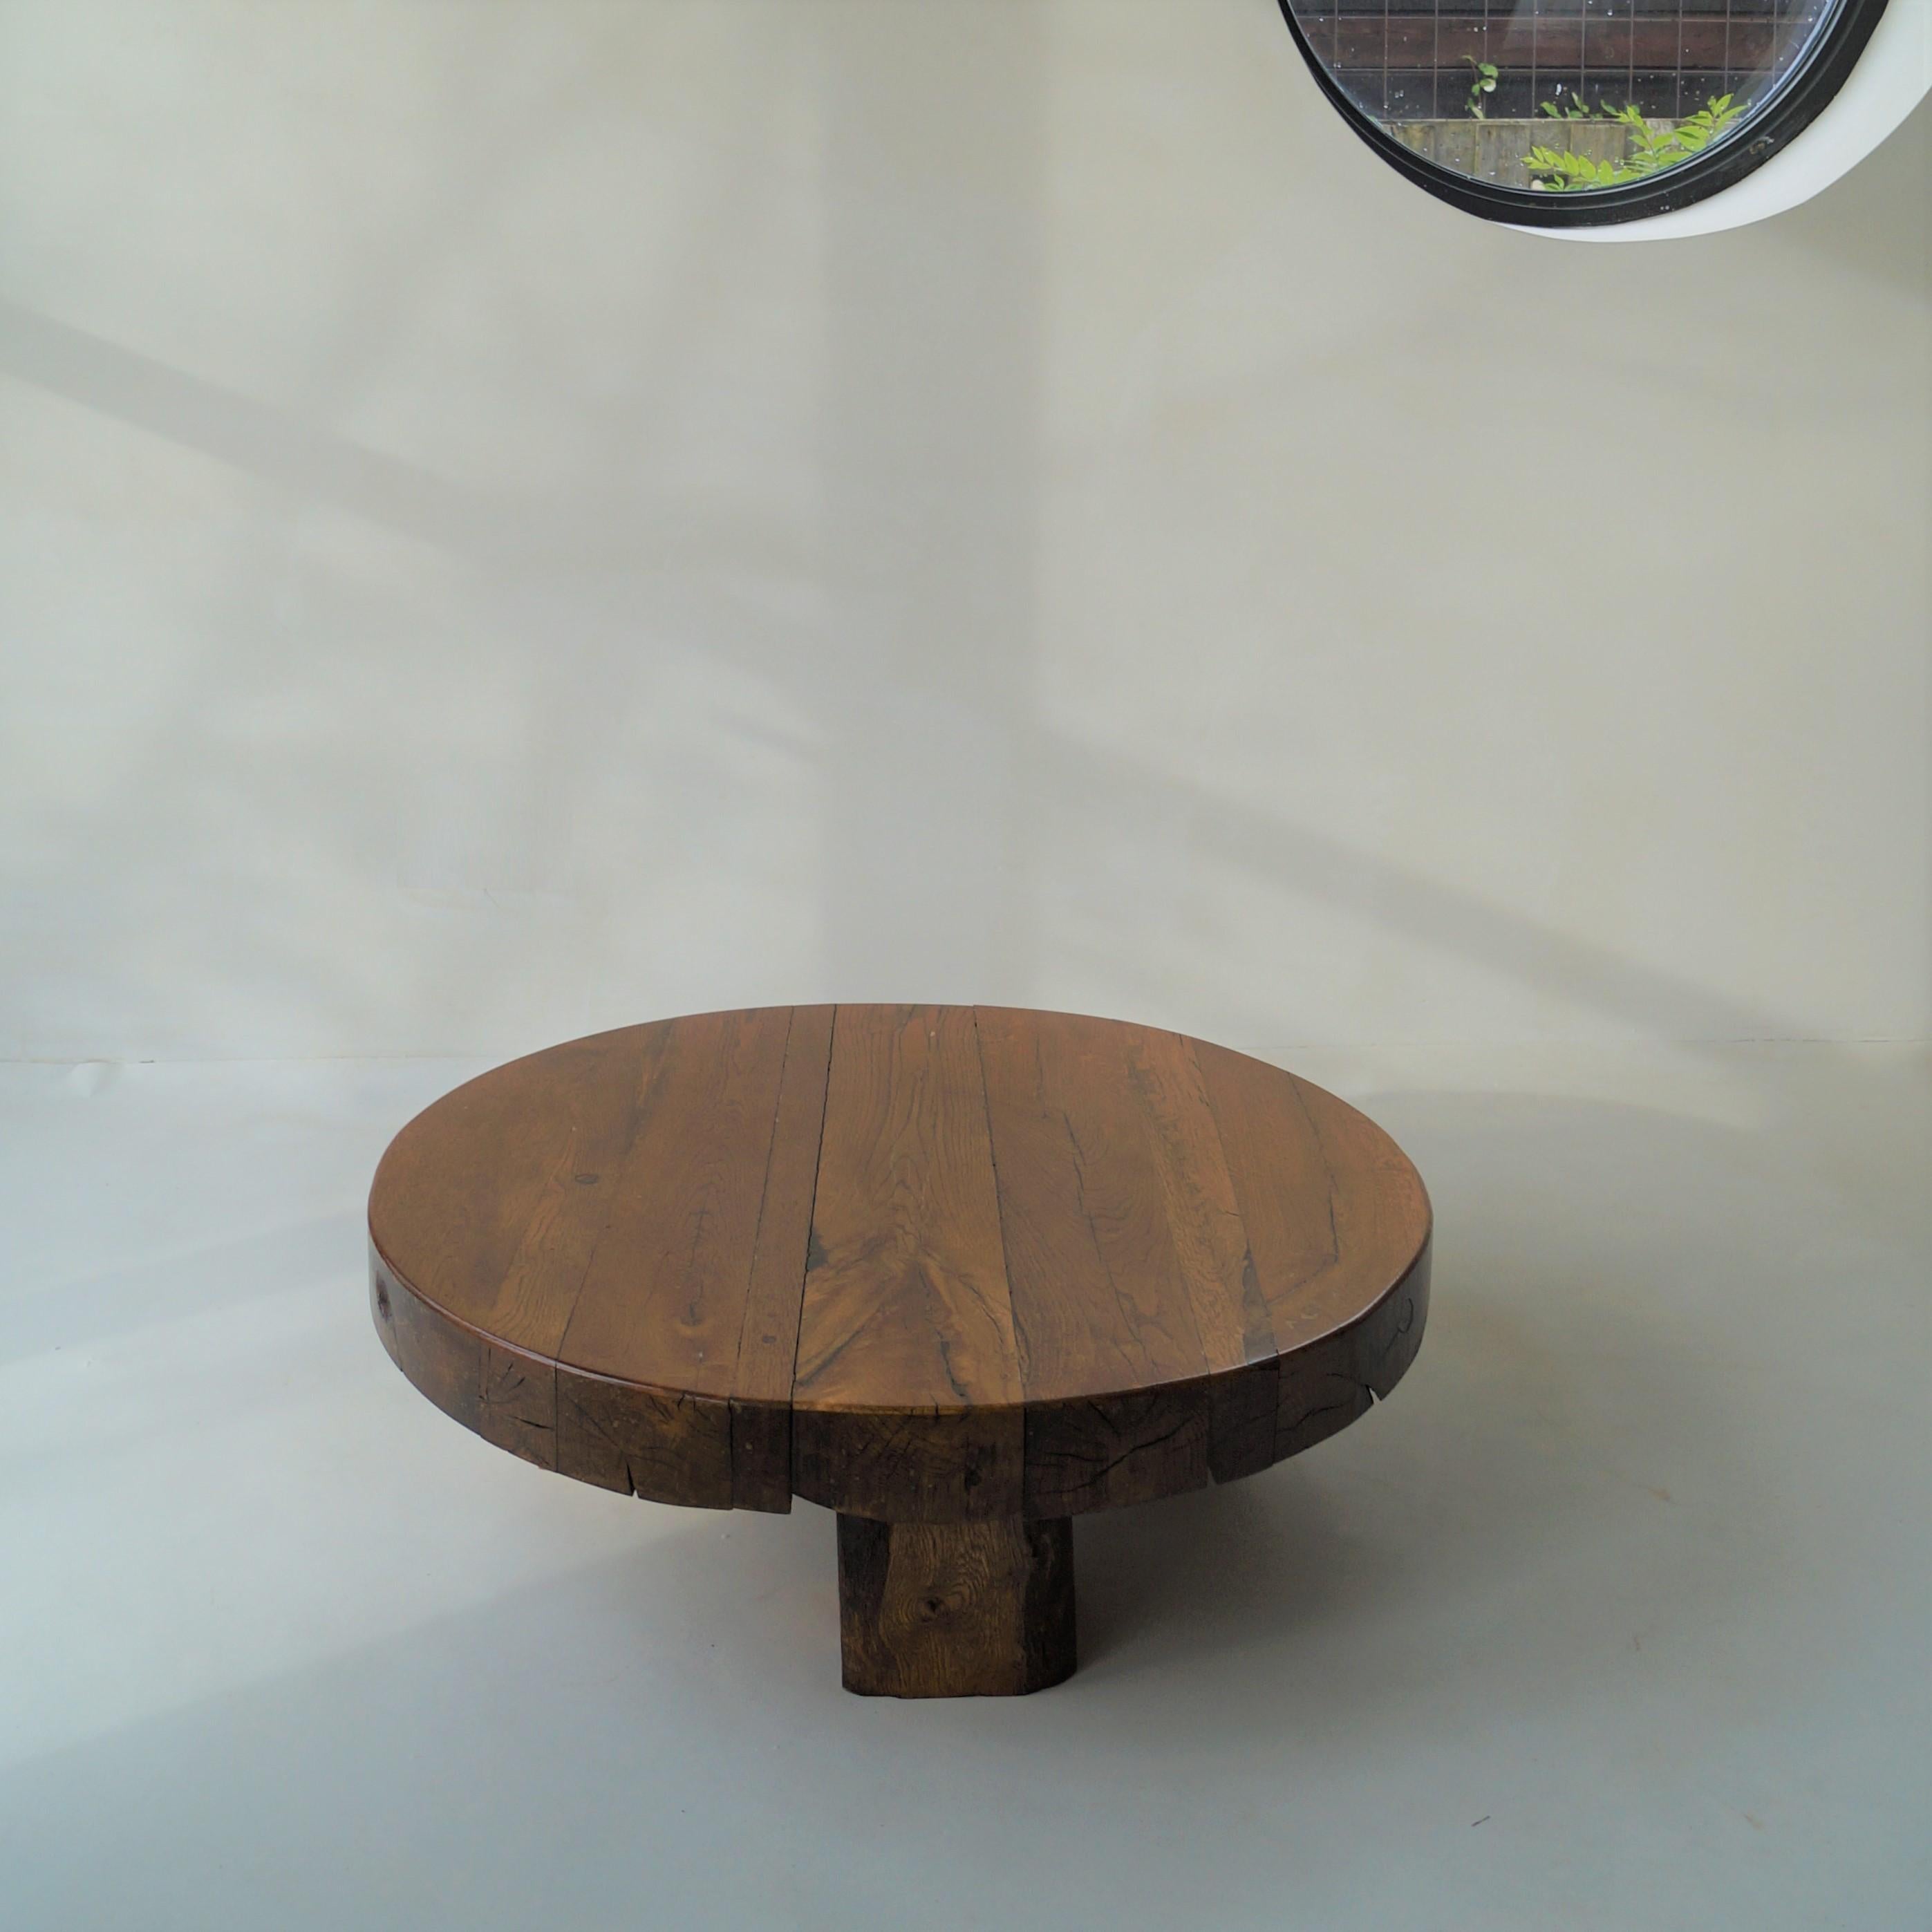 Late 20th Century Brutalist Round Wooden Coffee Table, Netherlands, 1970s